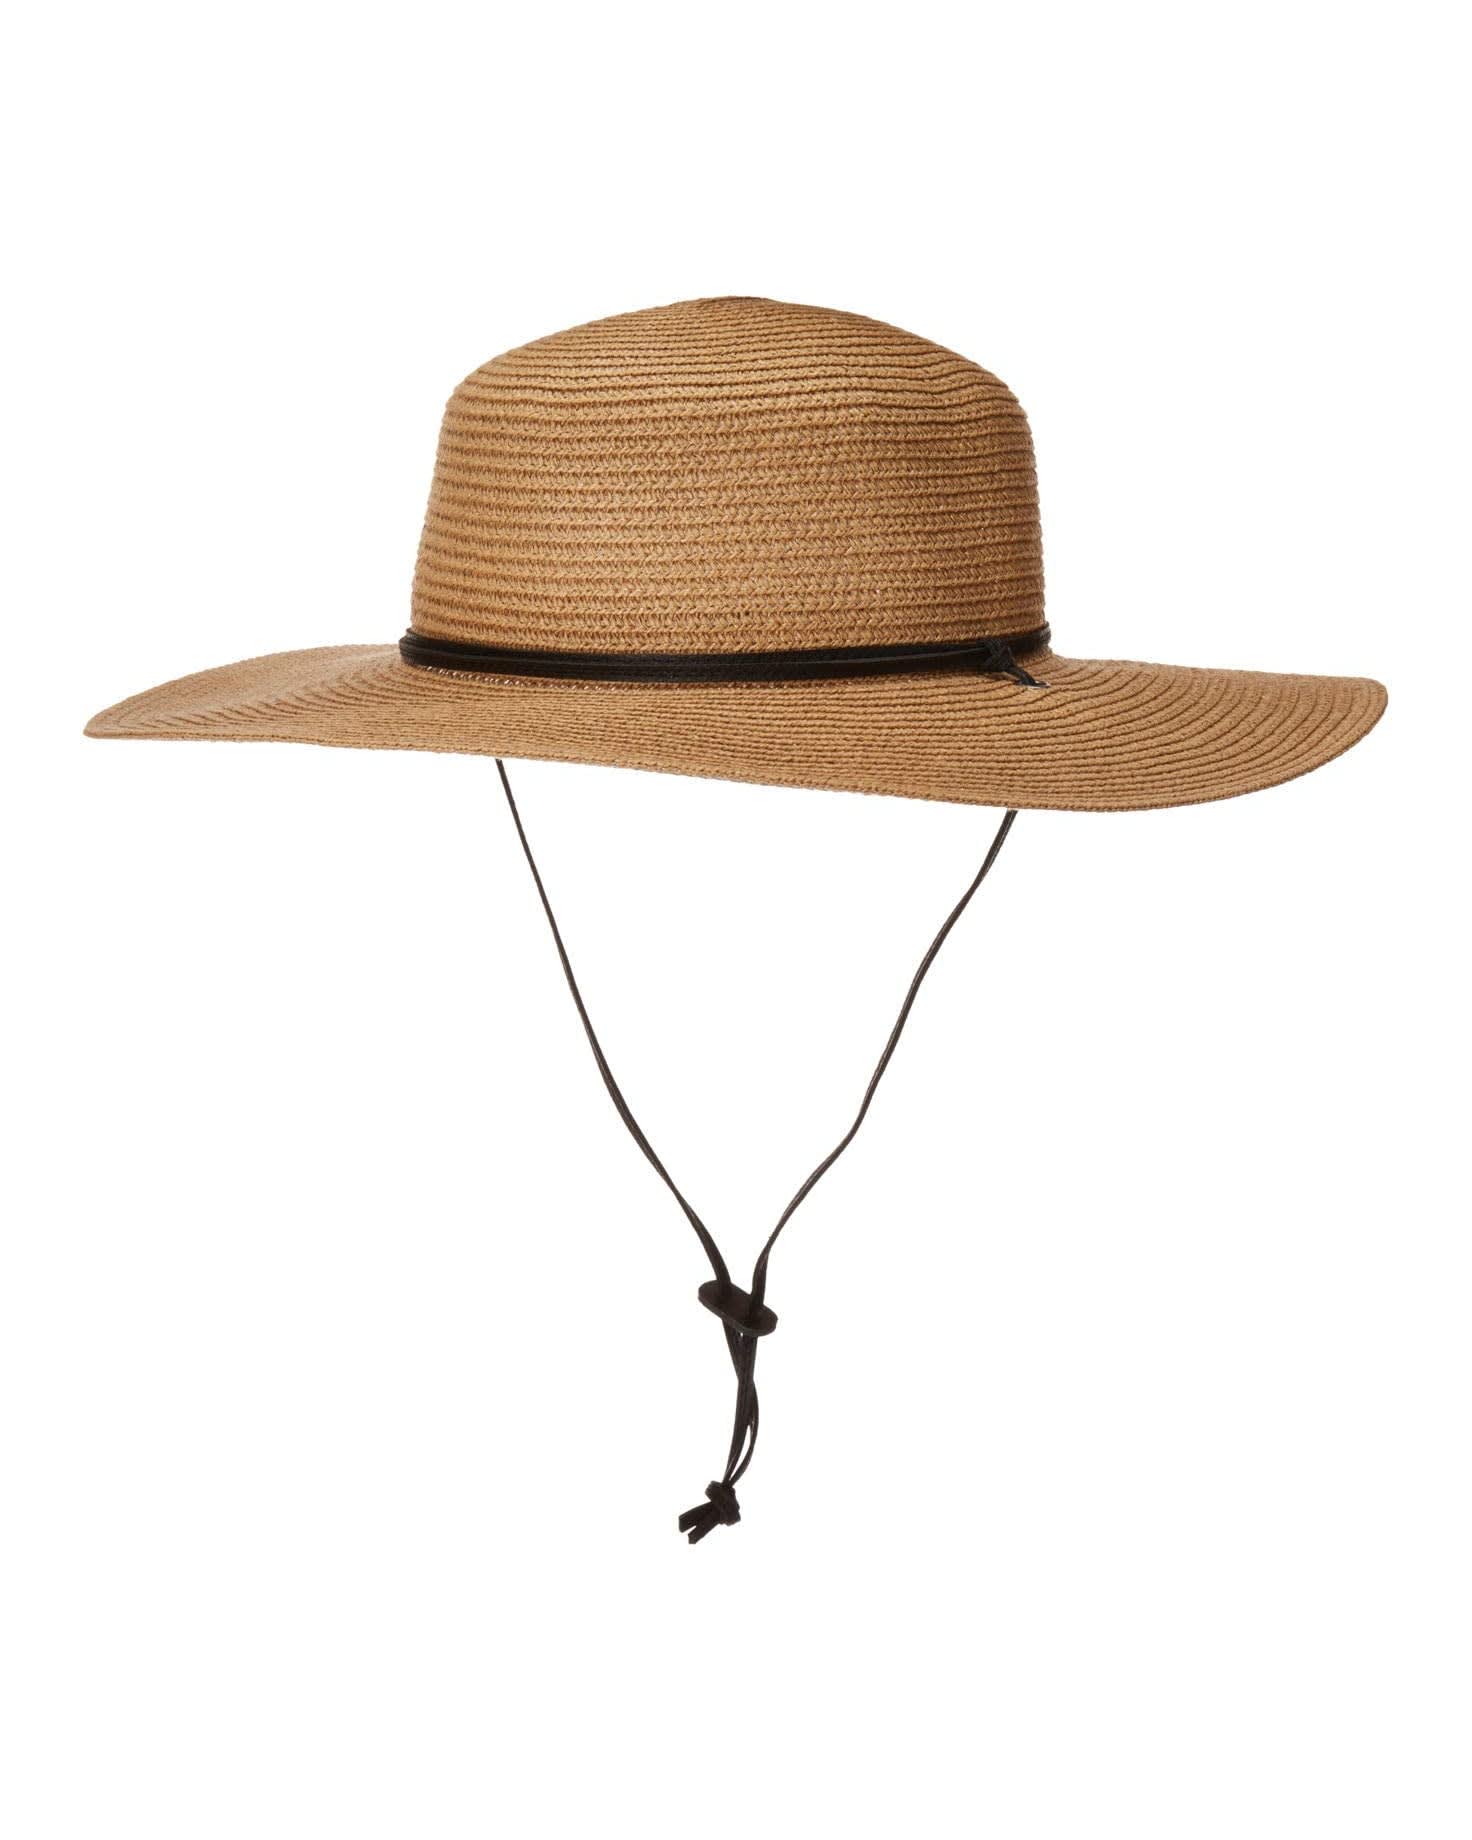 20 best sun hats of 2023 with UPF protection to keep skin safe